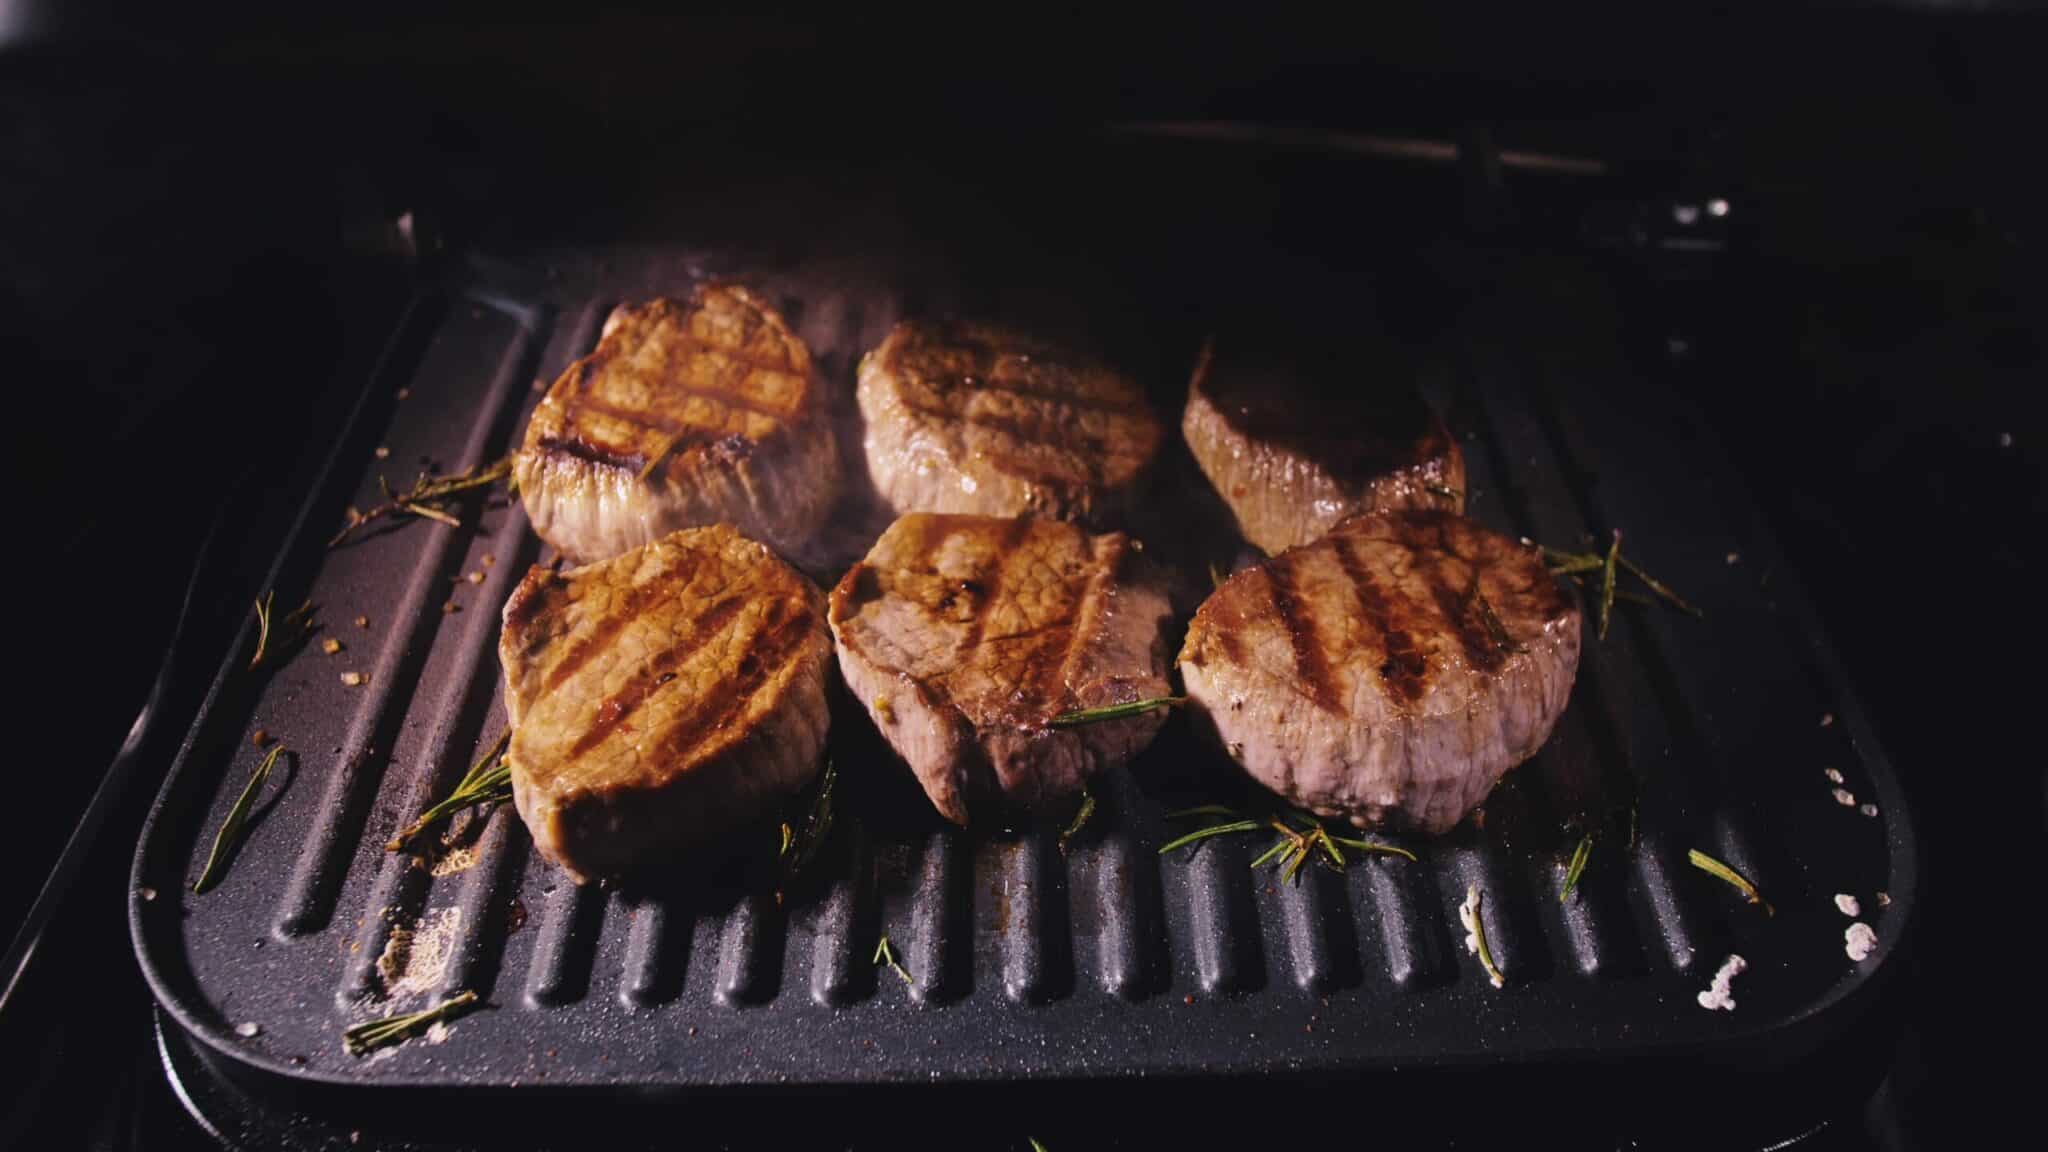 How To Cook Filet Mignon On Gas Grill